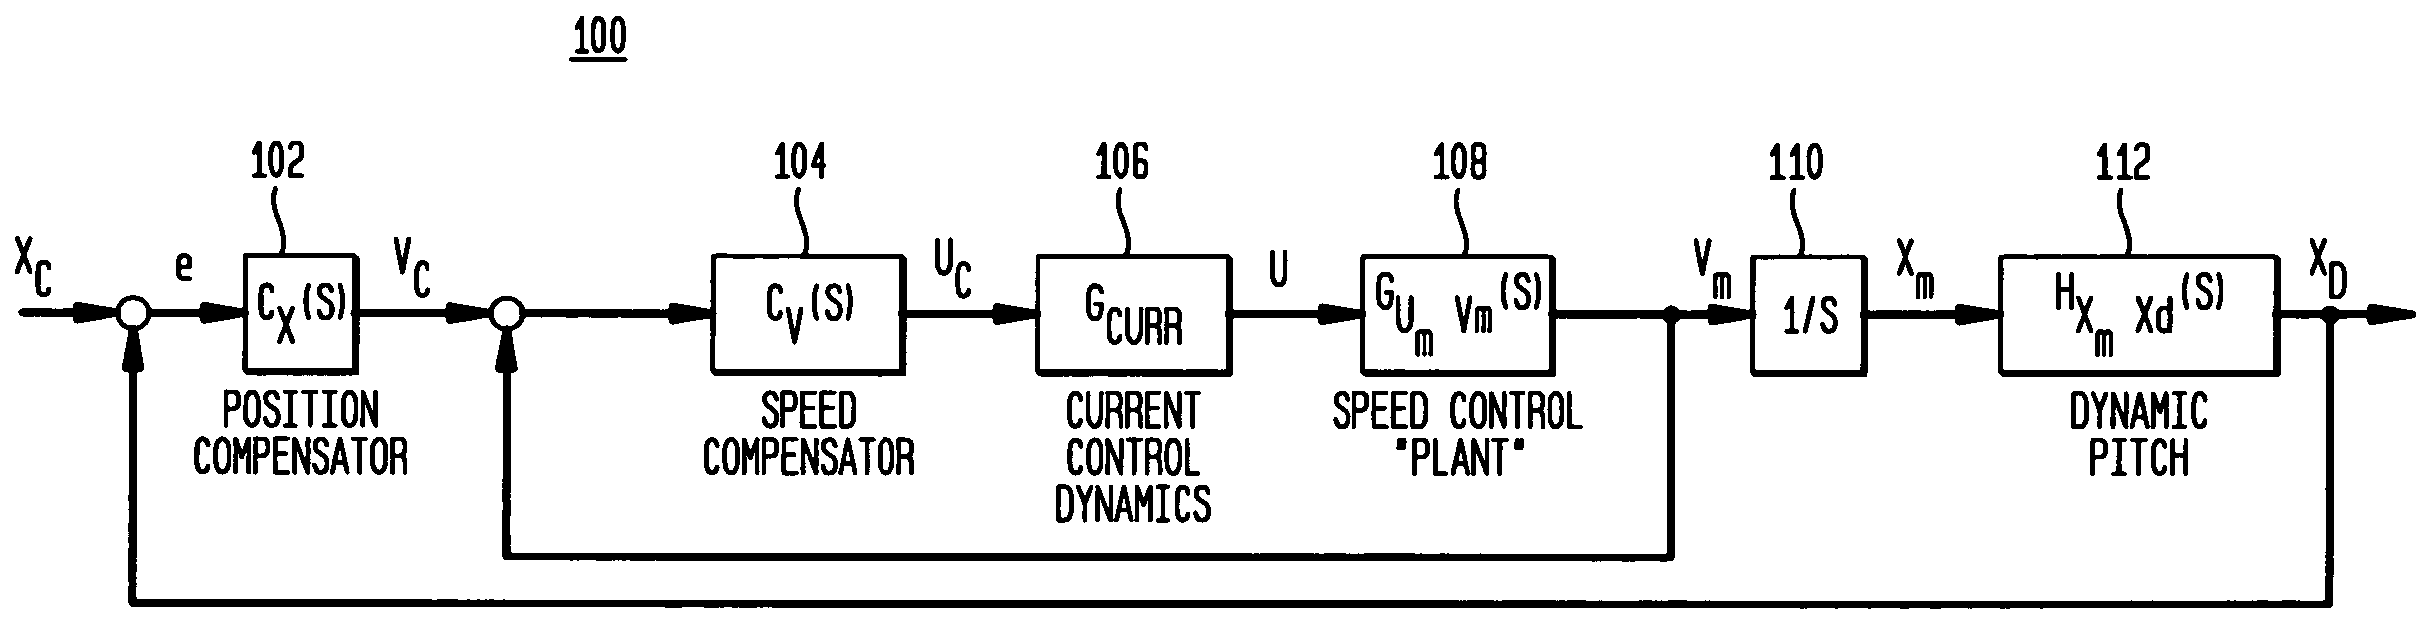 Automating tuning of a closed loop controller